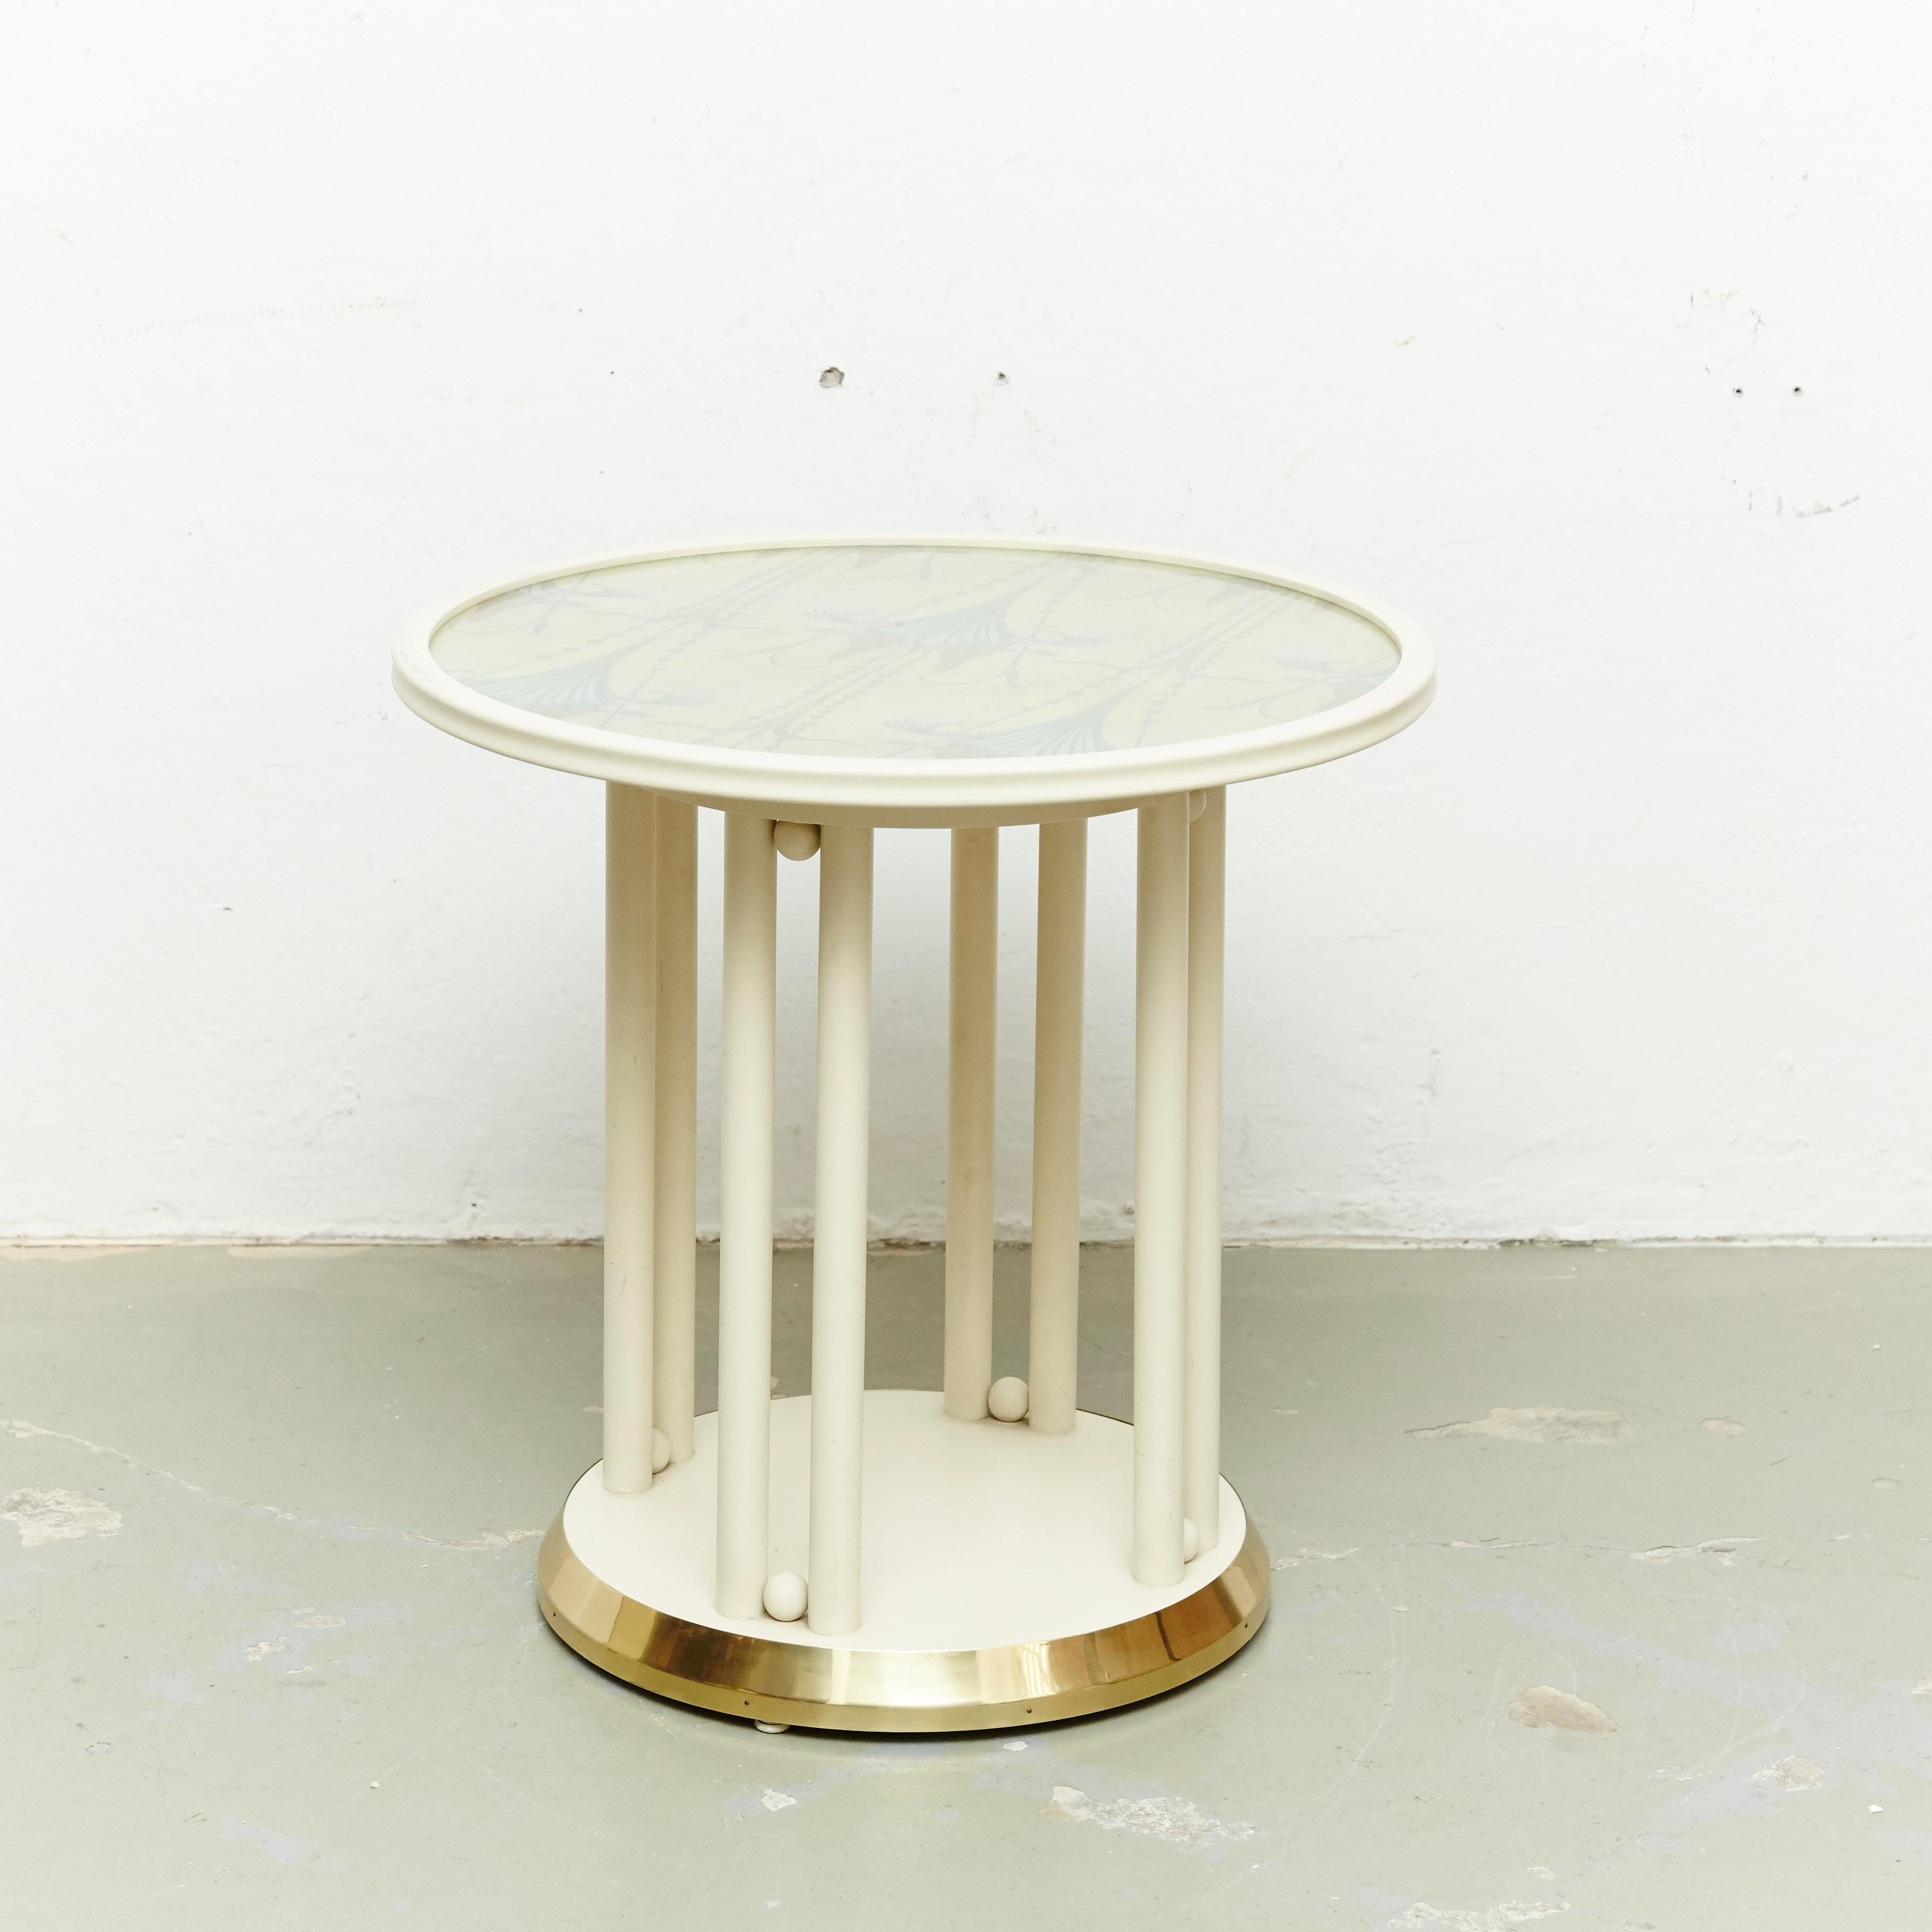 Table designed by Josef Hoffmann, circa 1905 for Cabaret Fledermaus in Viena.
Manufactured by Wittmann (Austria), circa 1960.
Lacquered wood and original upholstery.

With manufacturers label to the underside.

In original condition, with